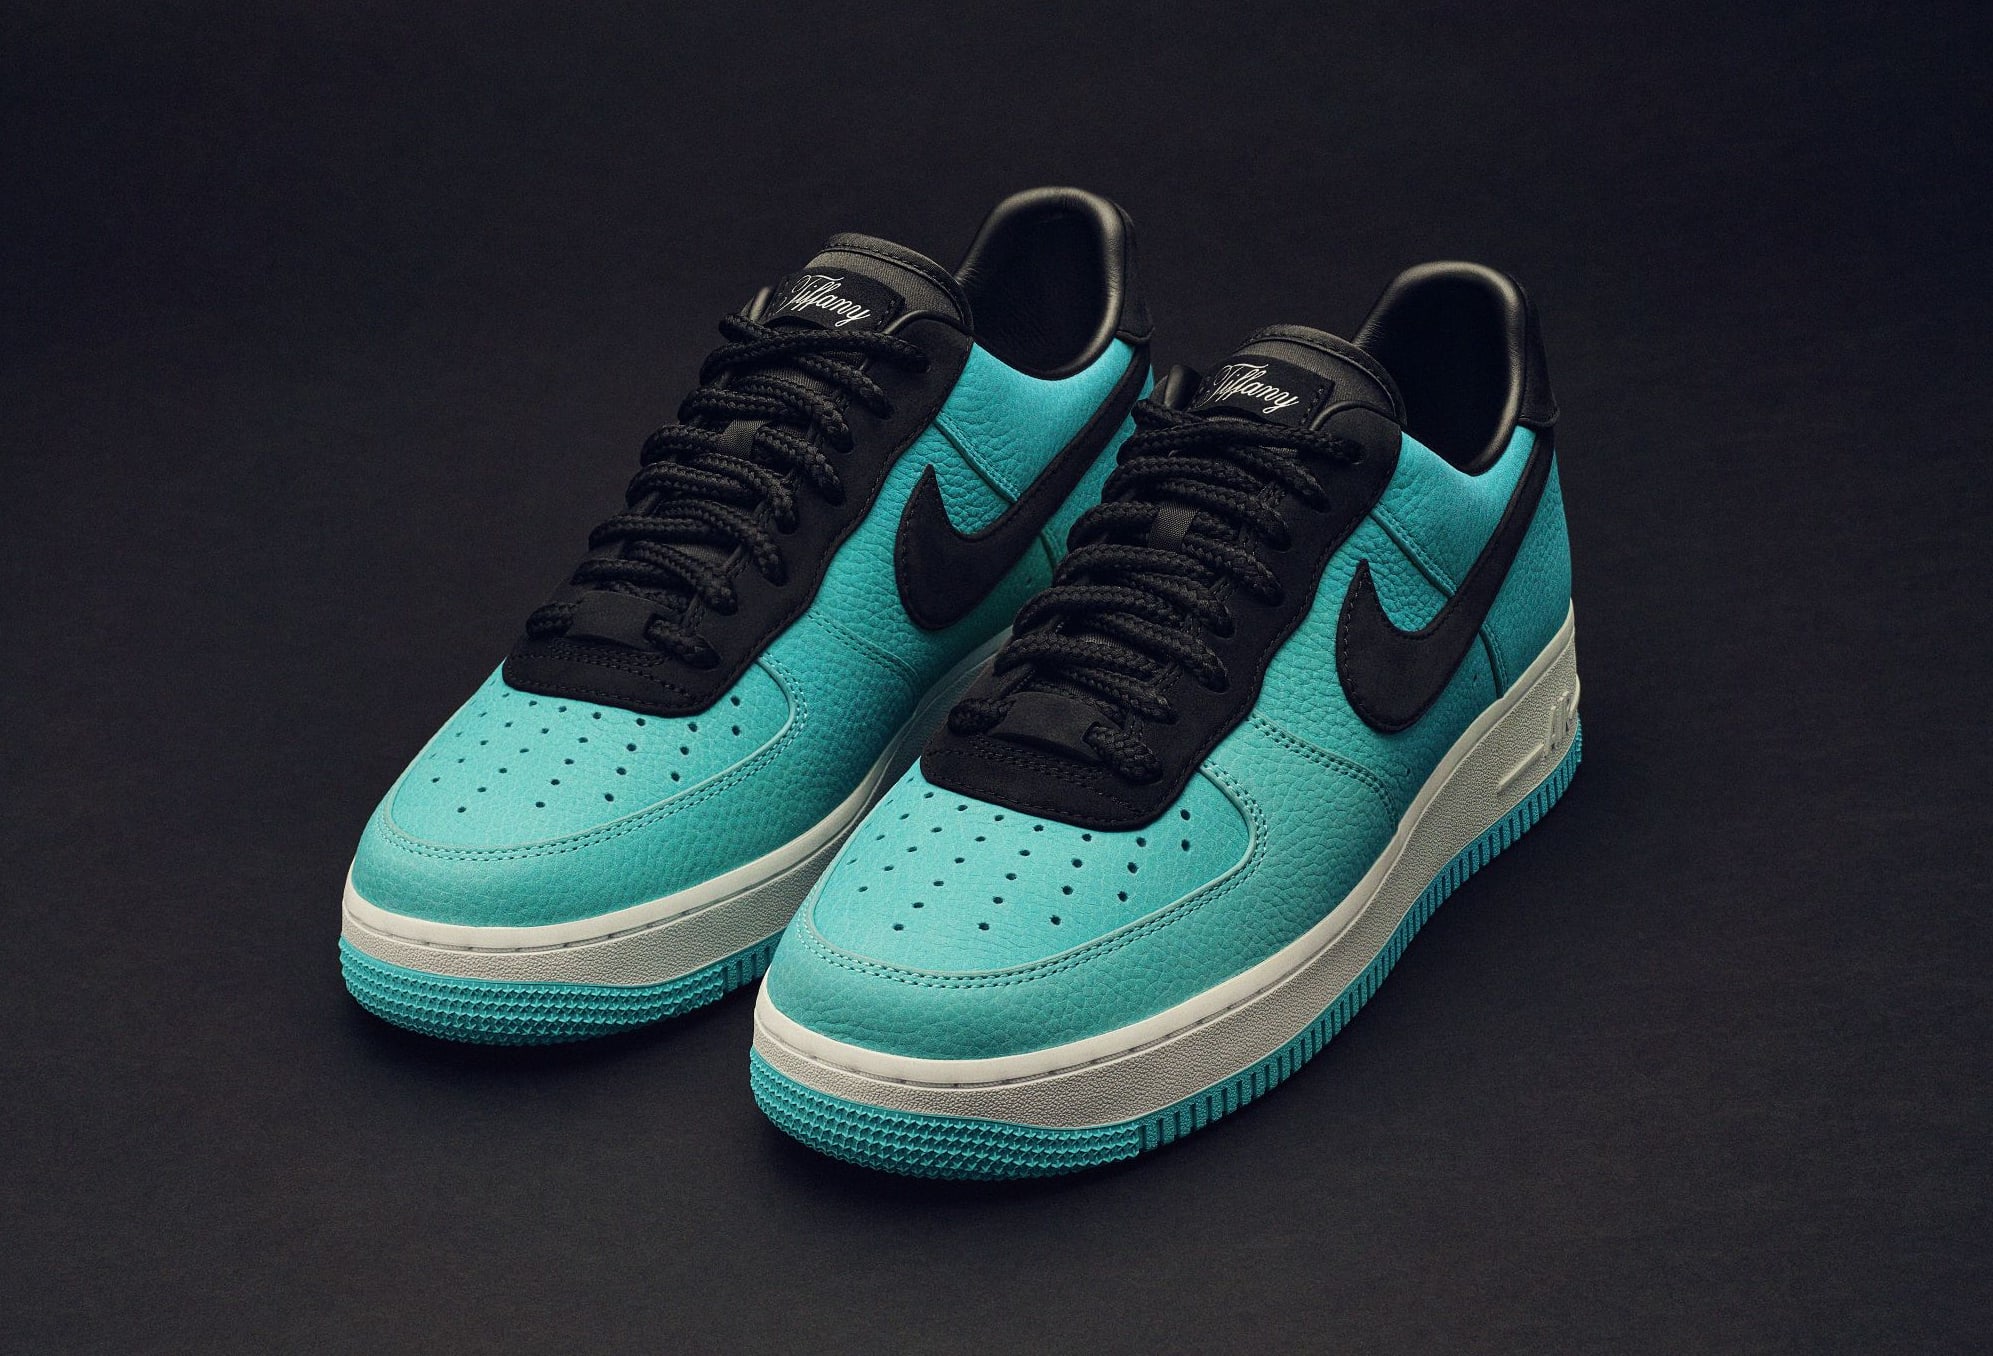 Tiffany Blue Air Force 1s 🤩✨ #AirForce1s #ShoeArt #ShoeArtist